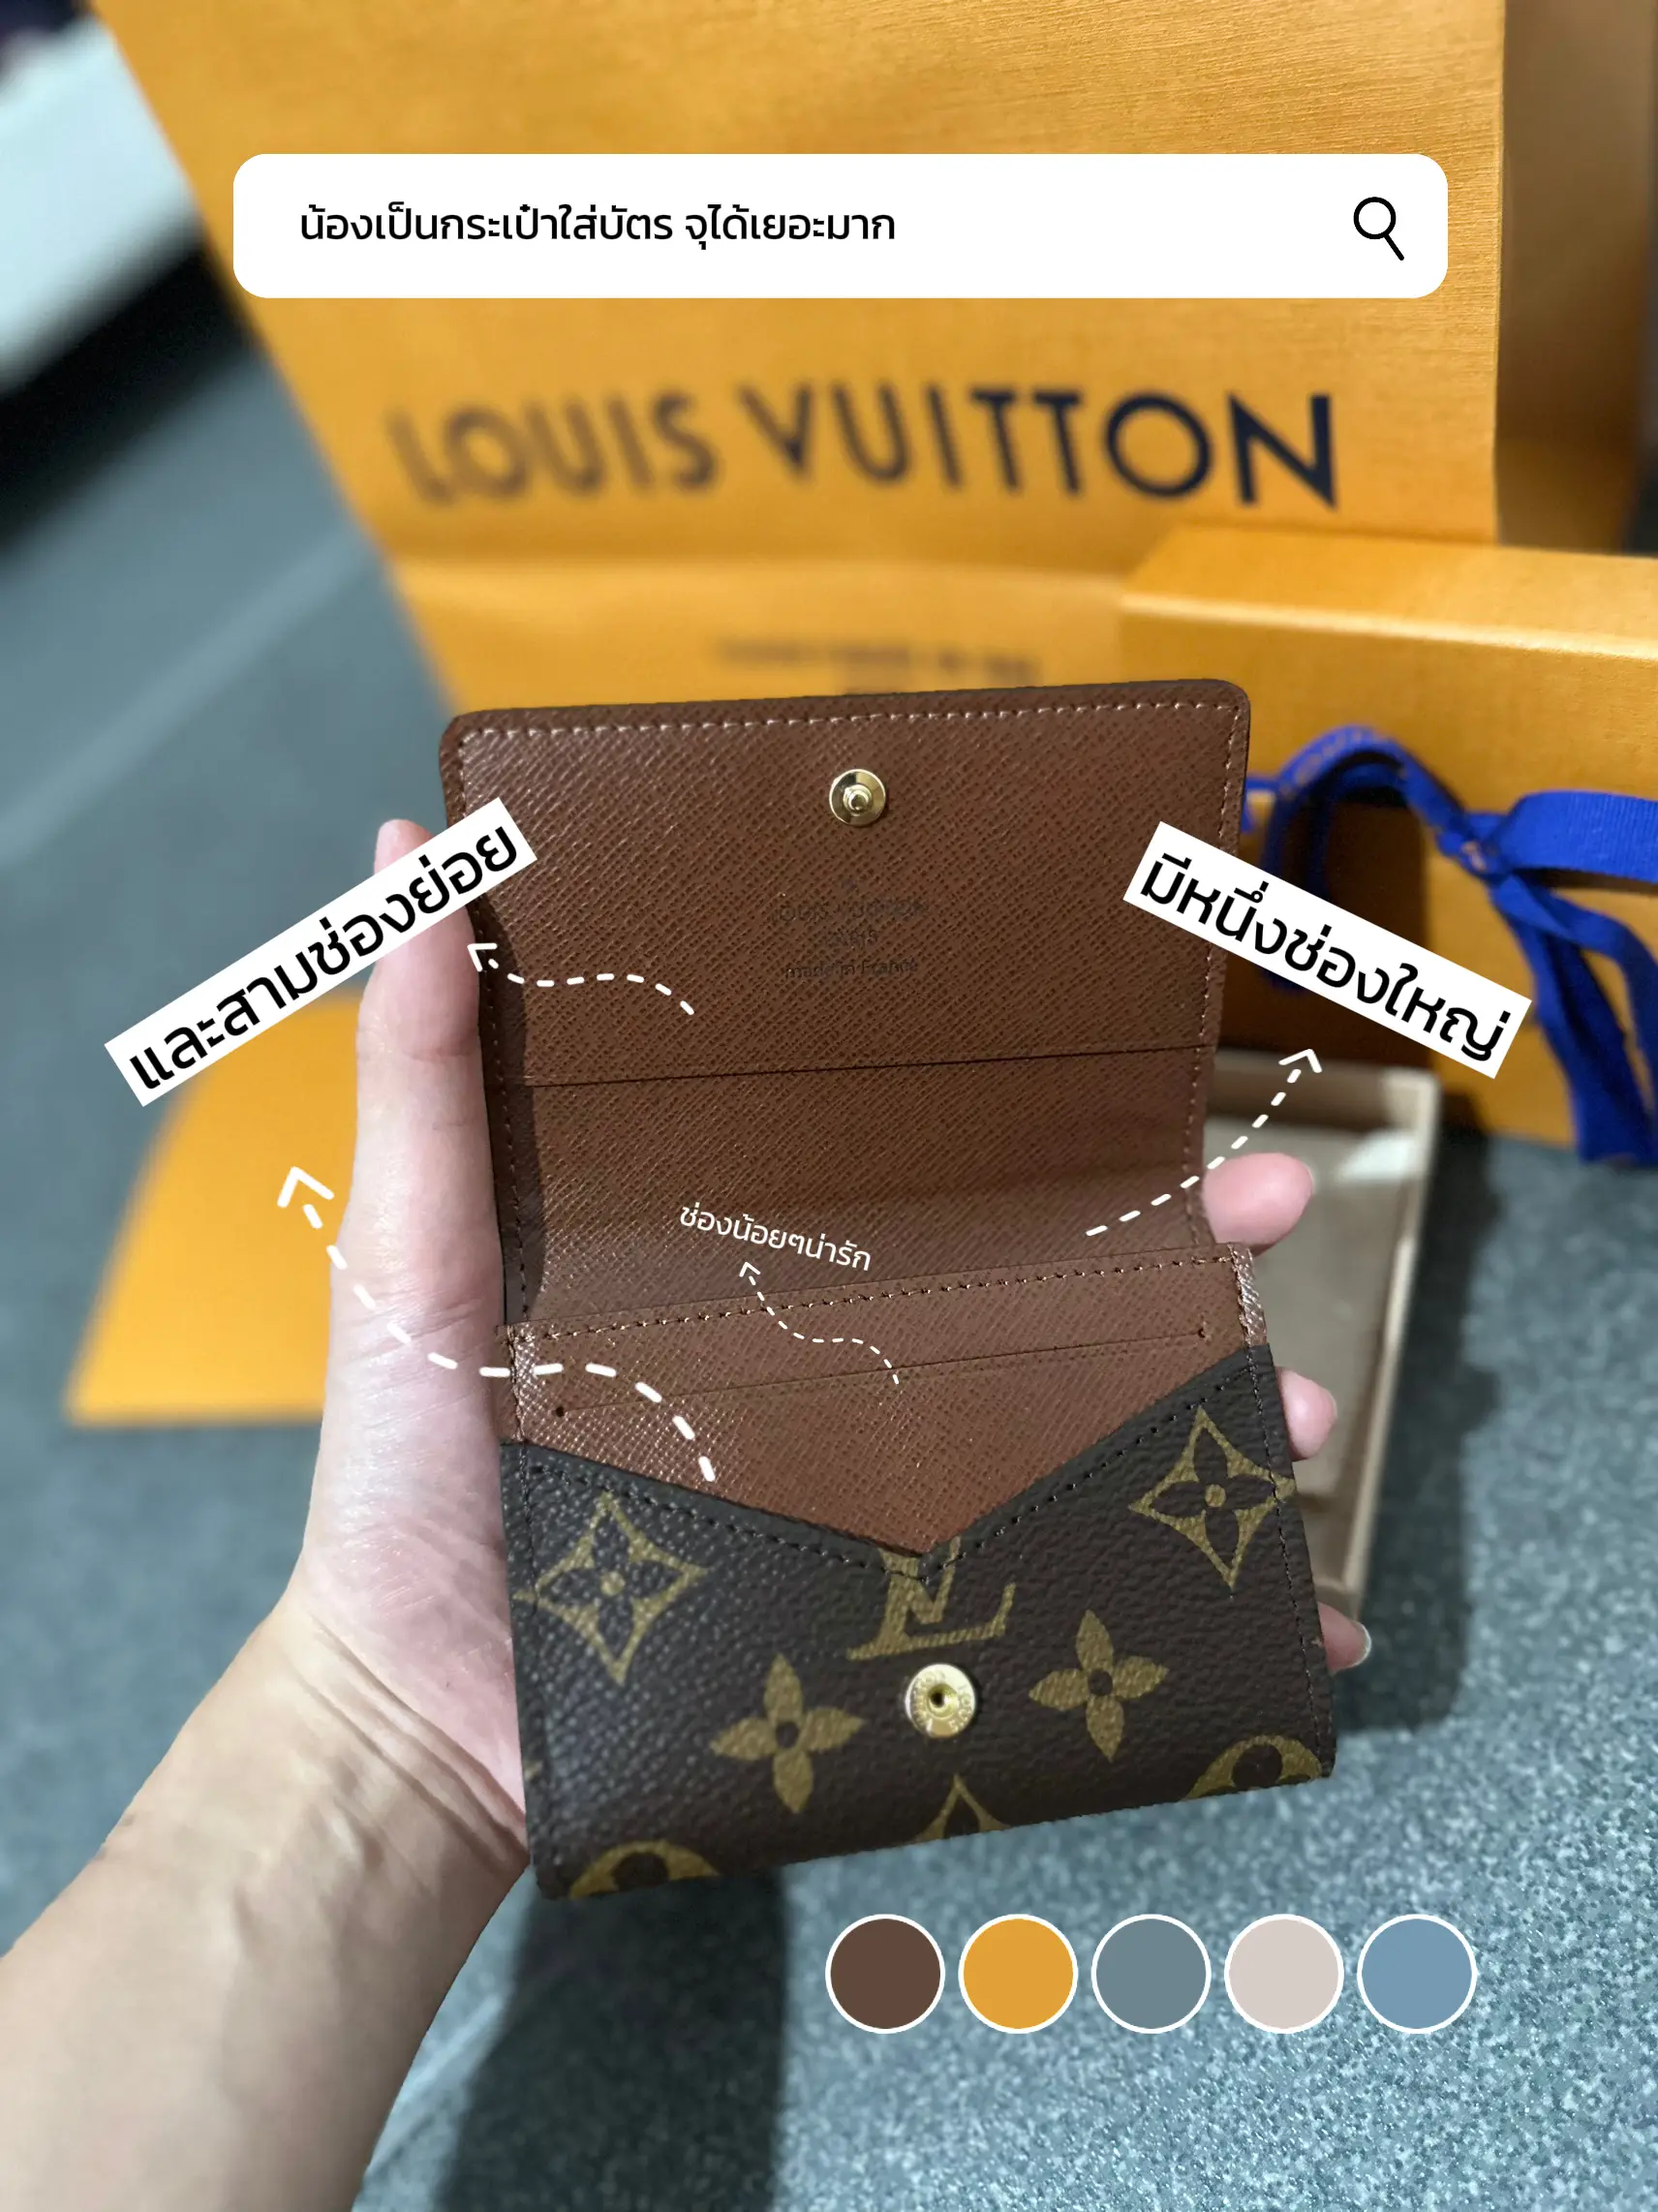 Louis Vuitton Envelope Business Card Holder: An Under-Rated